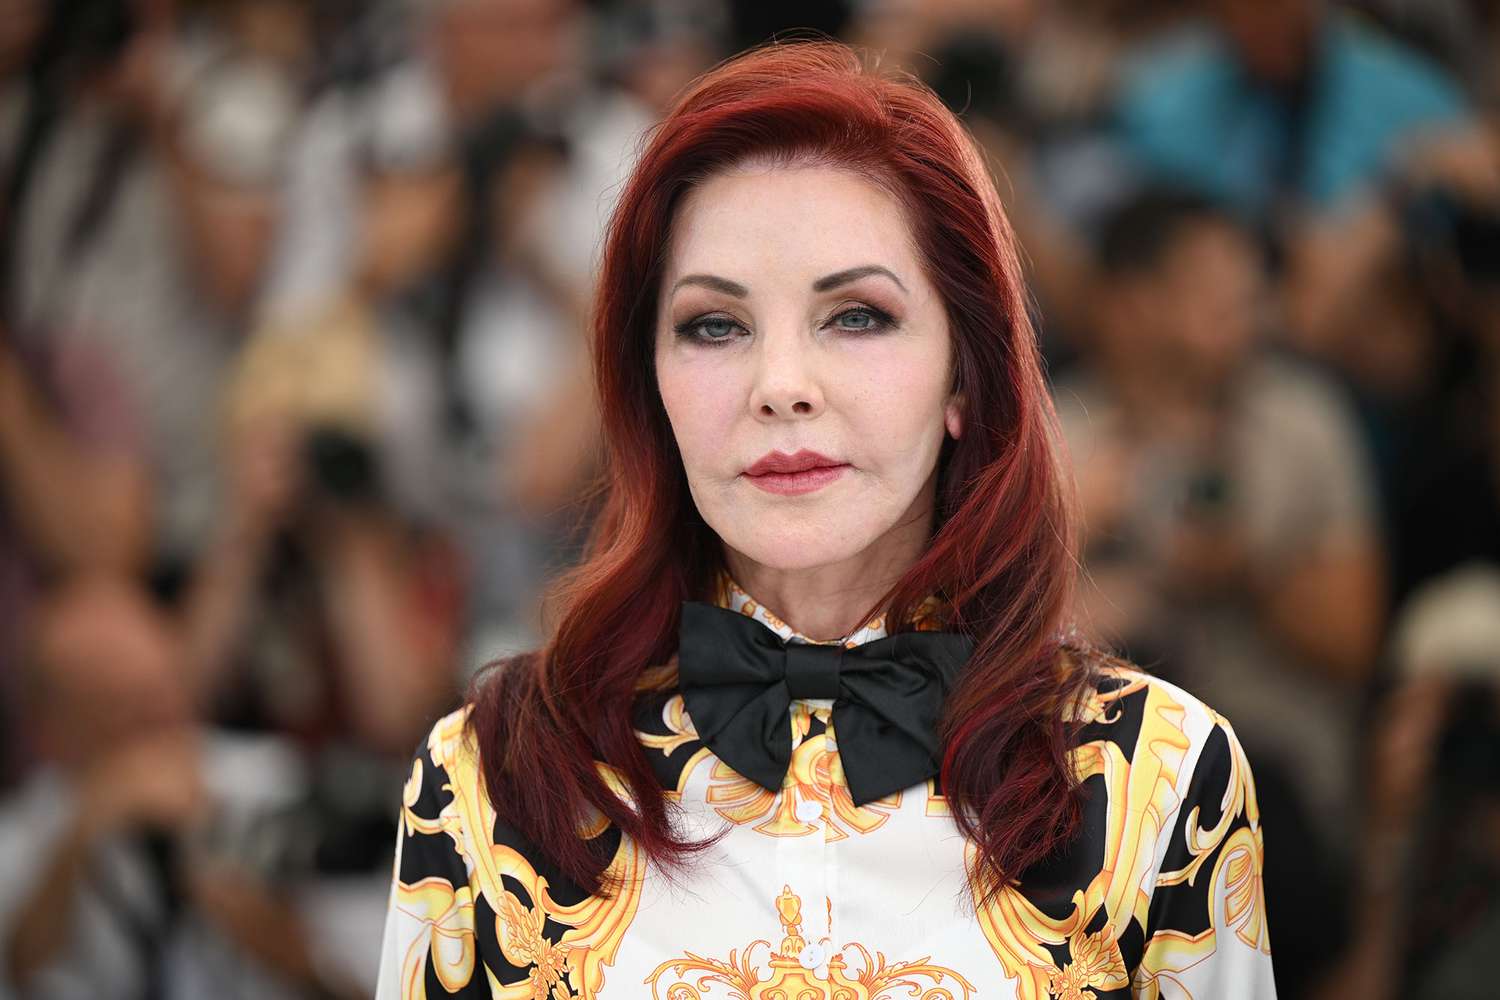 Priscilla Presley attends the photocall for "Elvis" during the 75th annual Cannes film festival at Palais des Festivals on May 26, 2022 in Cannes, France.